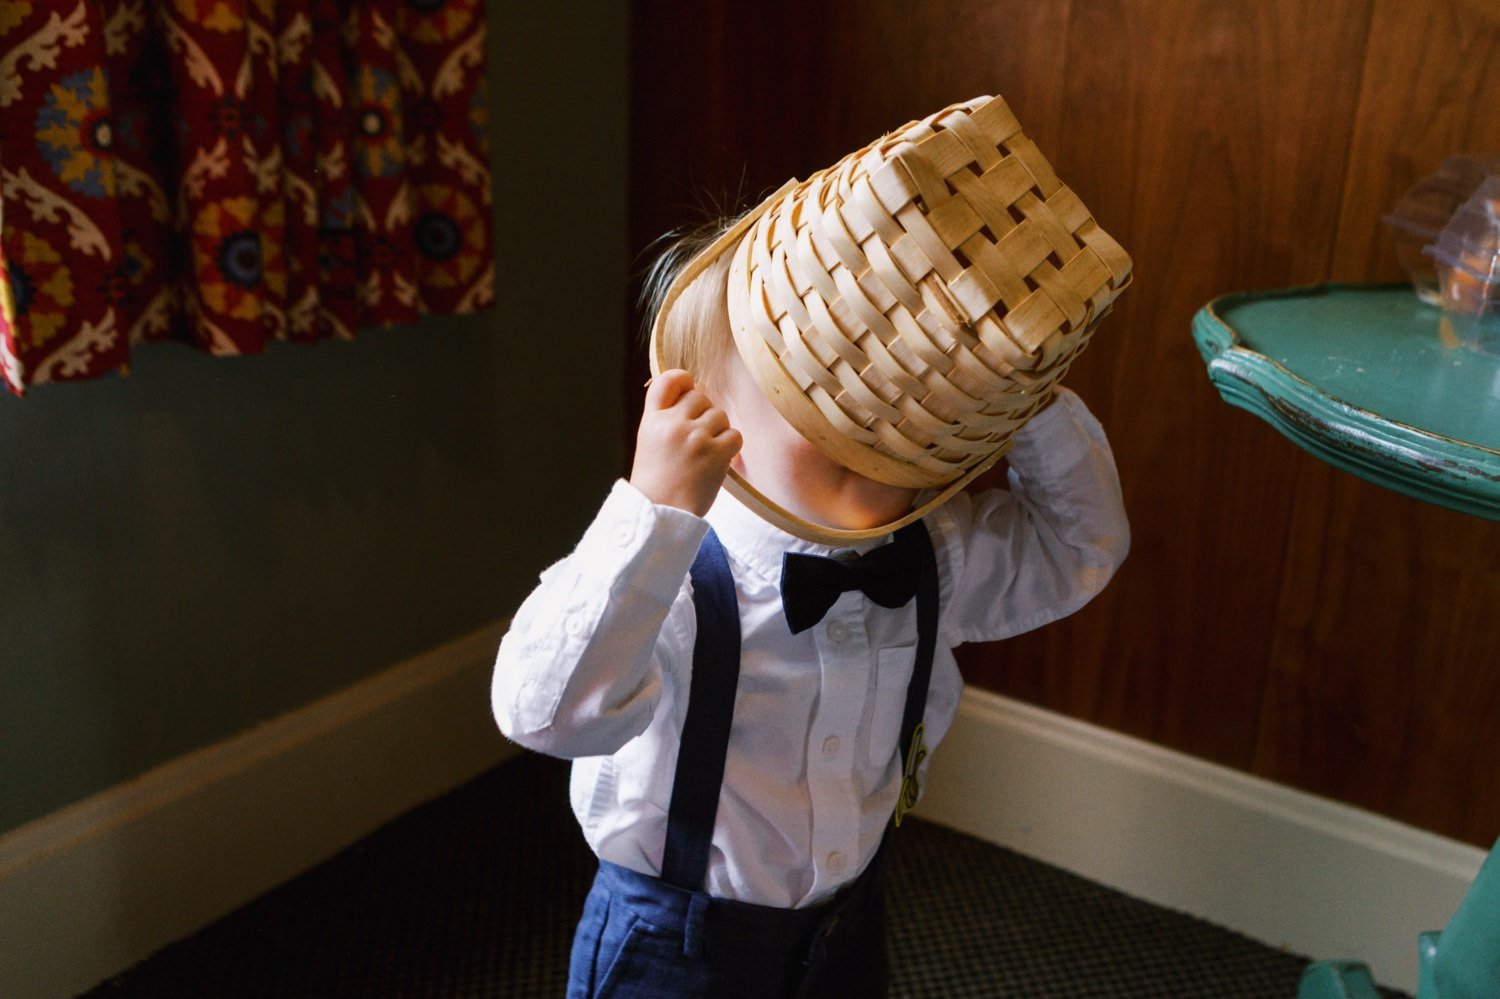  toddler in suspenders and bowtie puts wicker basket over his head 